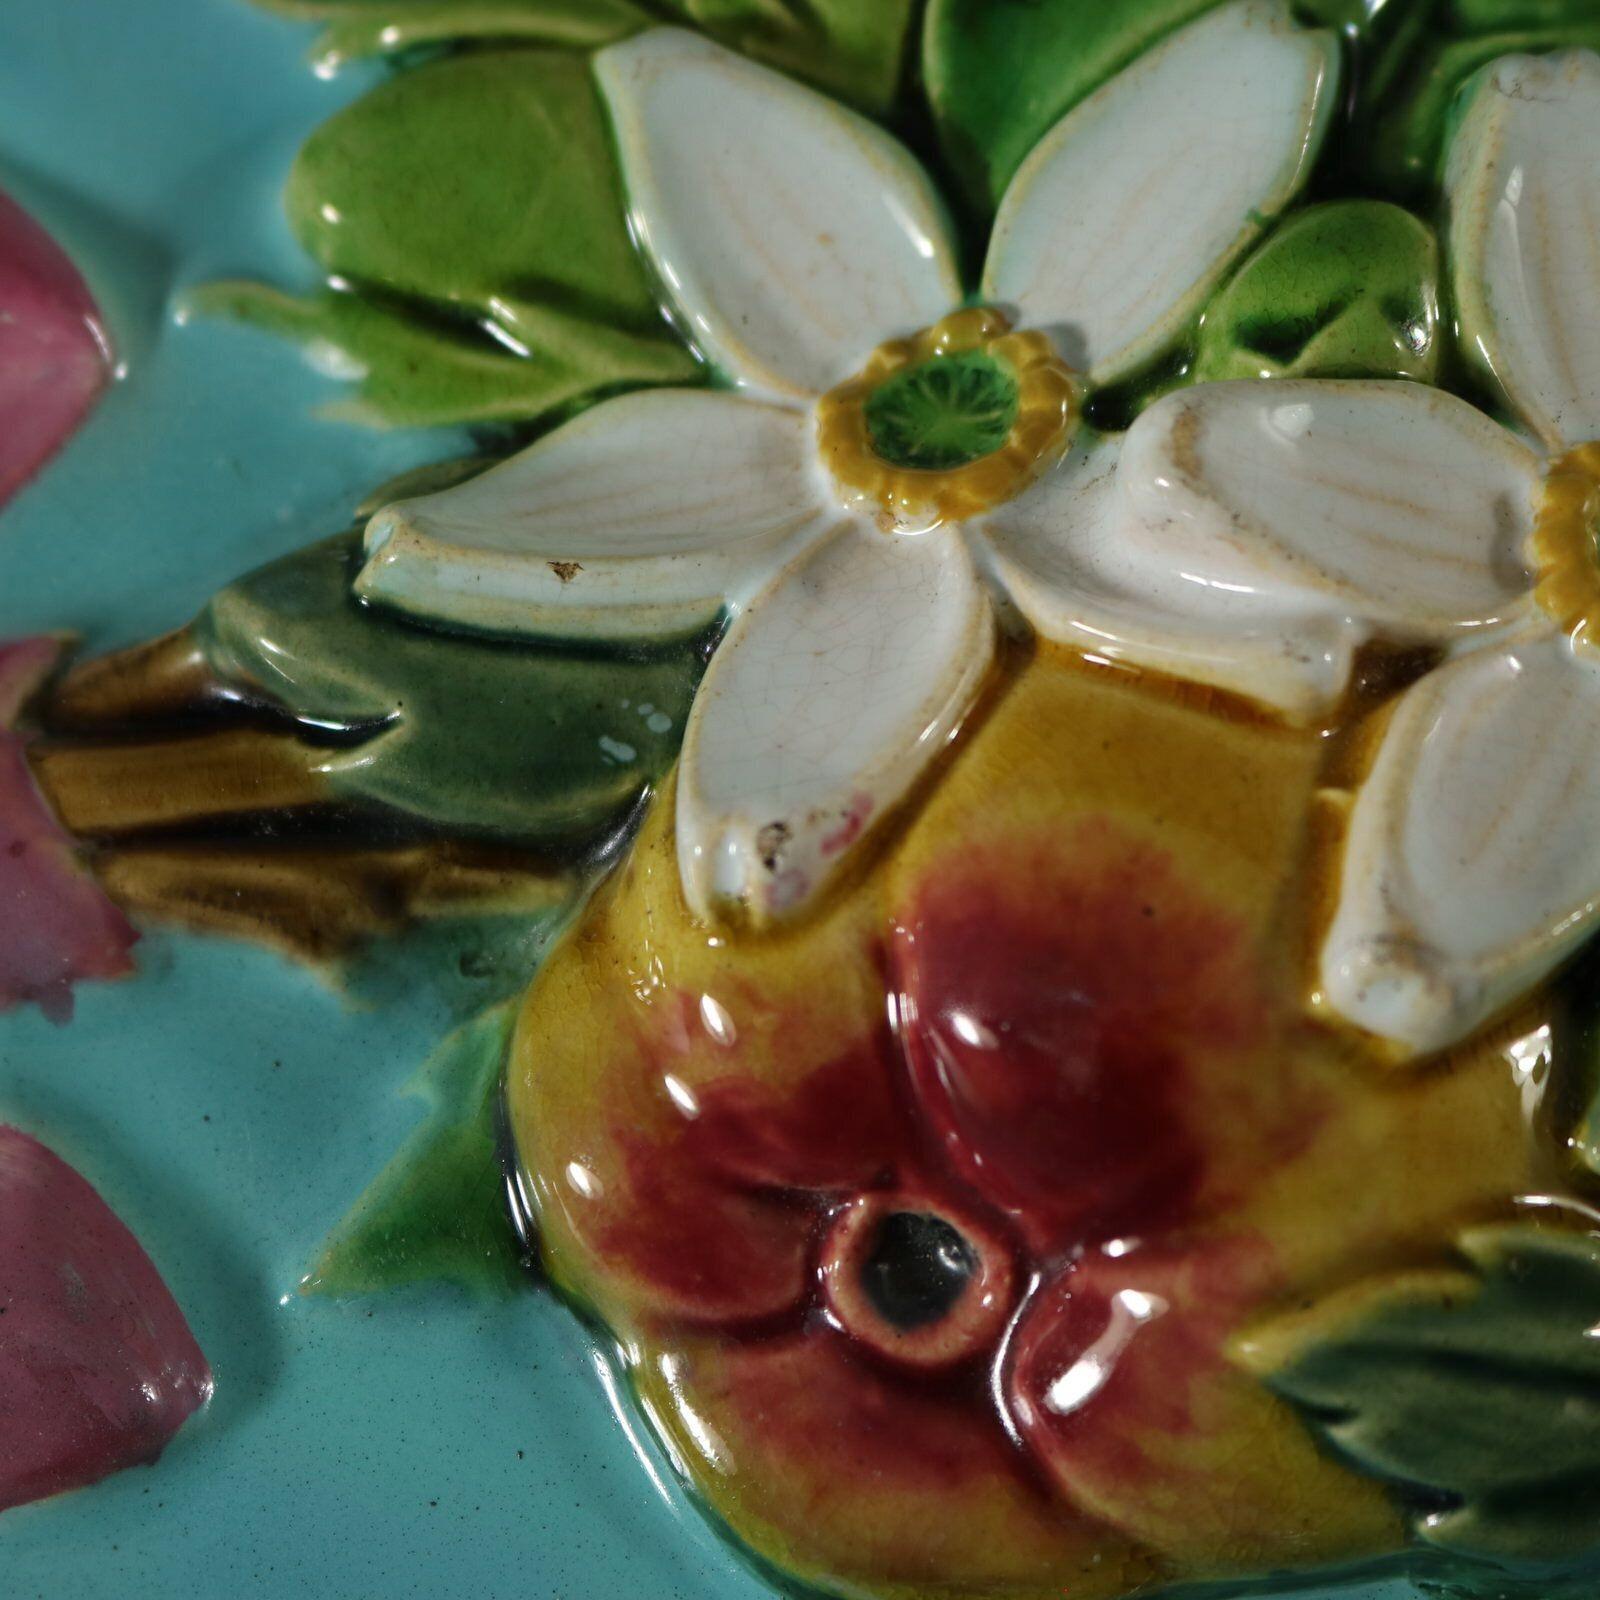 Minton Majolica Fruit and Flowers Tile In Good Condition For Sale In Chelmsford, Essex